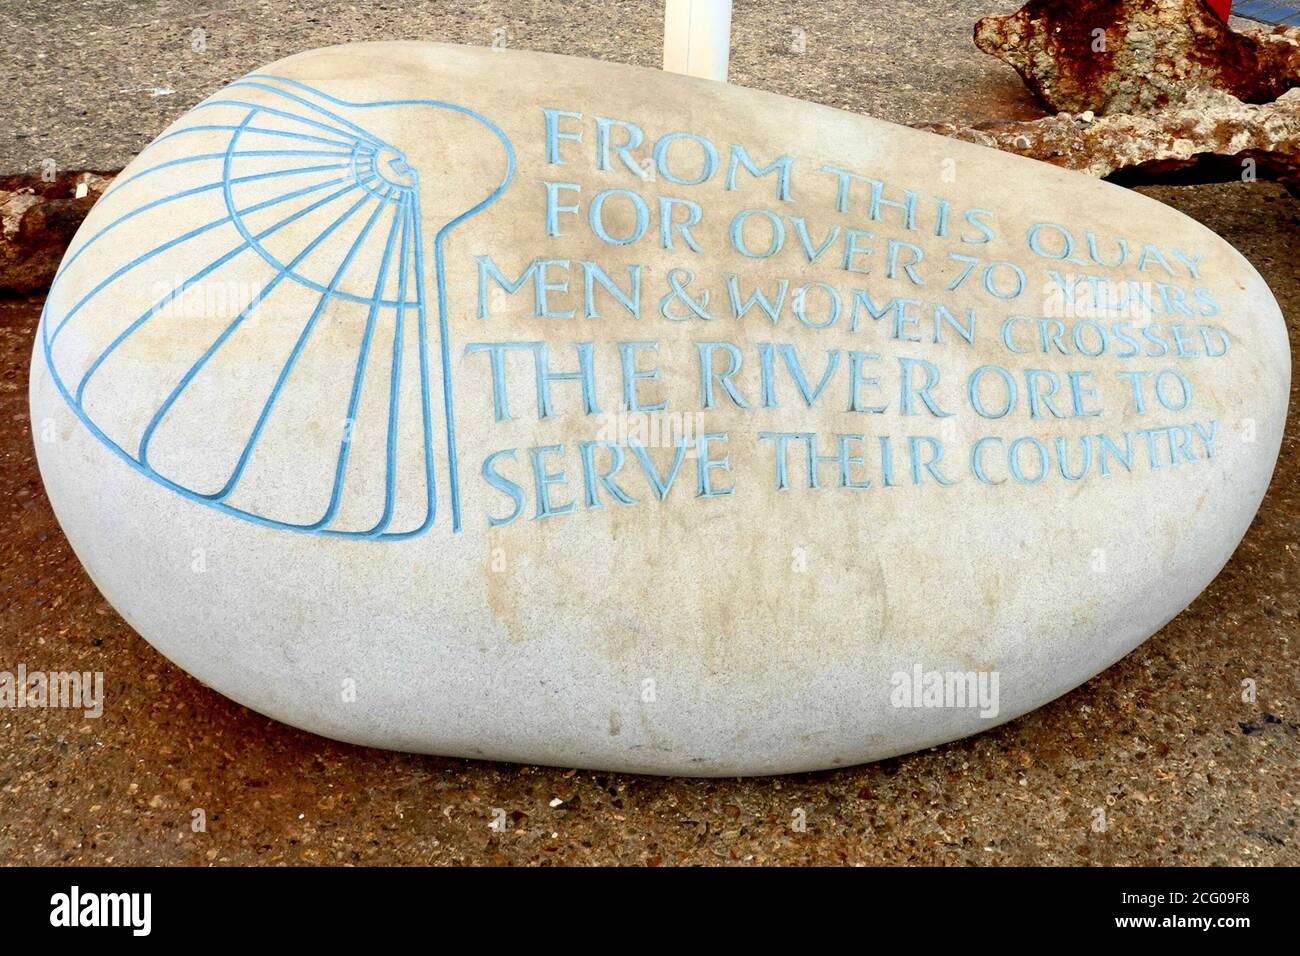 Orford, Suffolk, UK - 8 September 2020: Memorial stone to remember workers at Orford Ness, historically the home of top secret military projects. Stock Photo